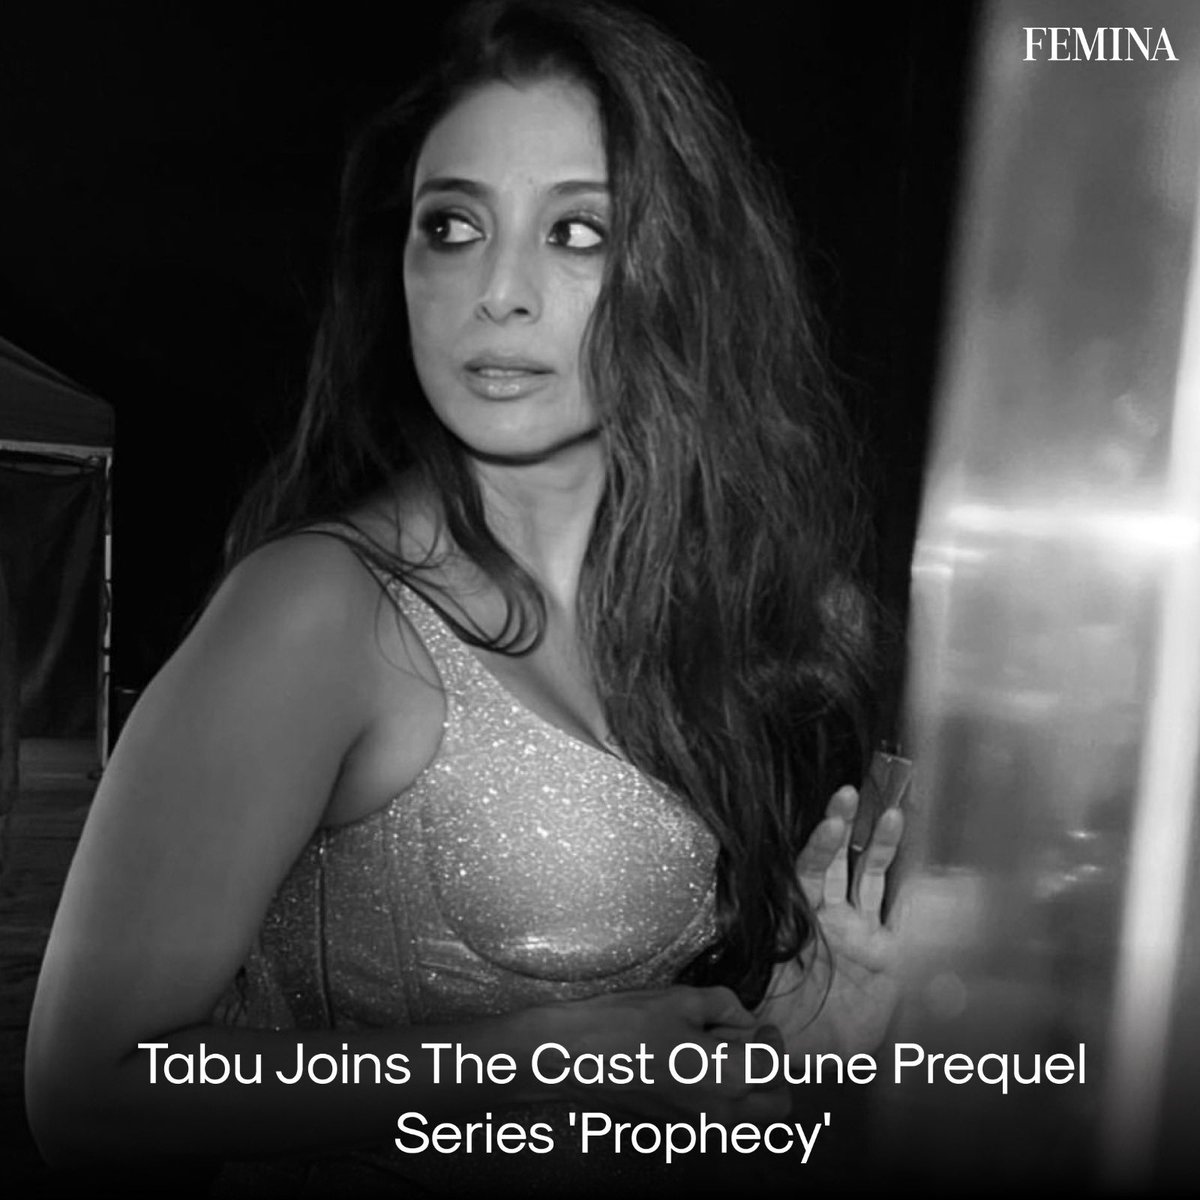 Tabu has been cast in the upcoming Max prequel series, Dune: Prophecy. The plot is set in the vast universe of Dune, crafted by celebrated writer Frank Herbert, and unfolds 10,000 years before the rise of Paul Atreides. Her character has been described as'once a great love of…